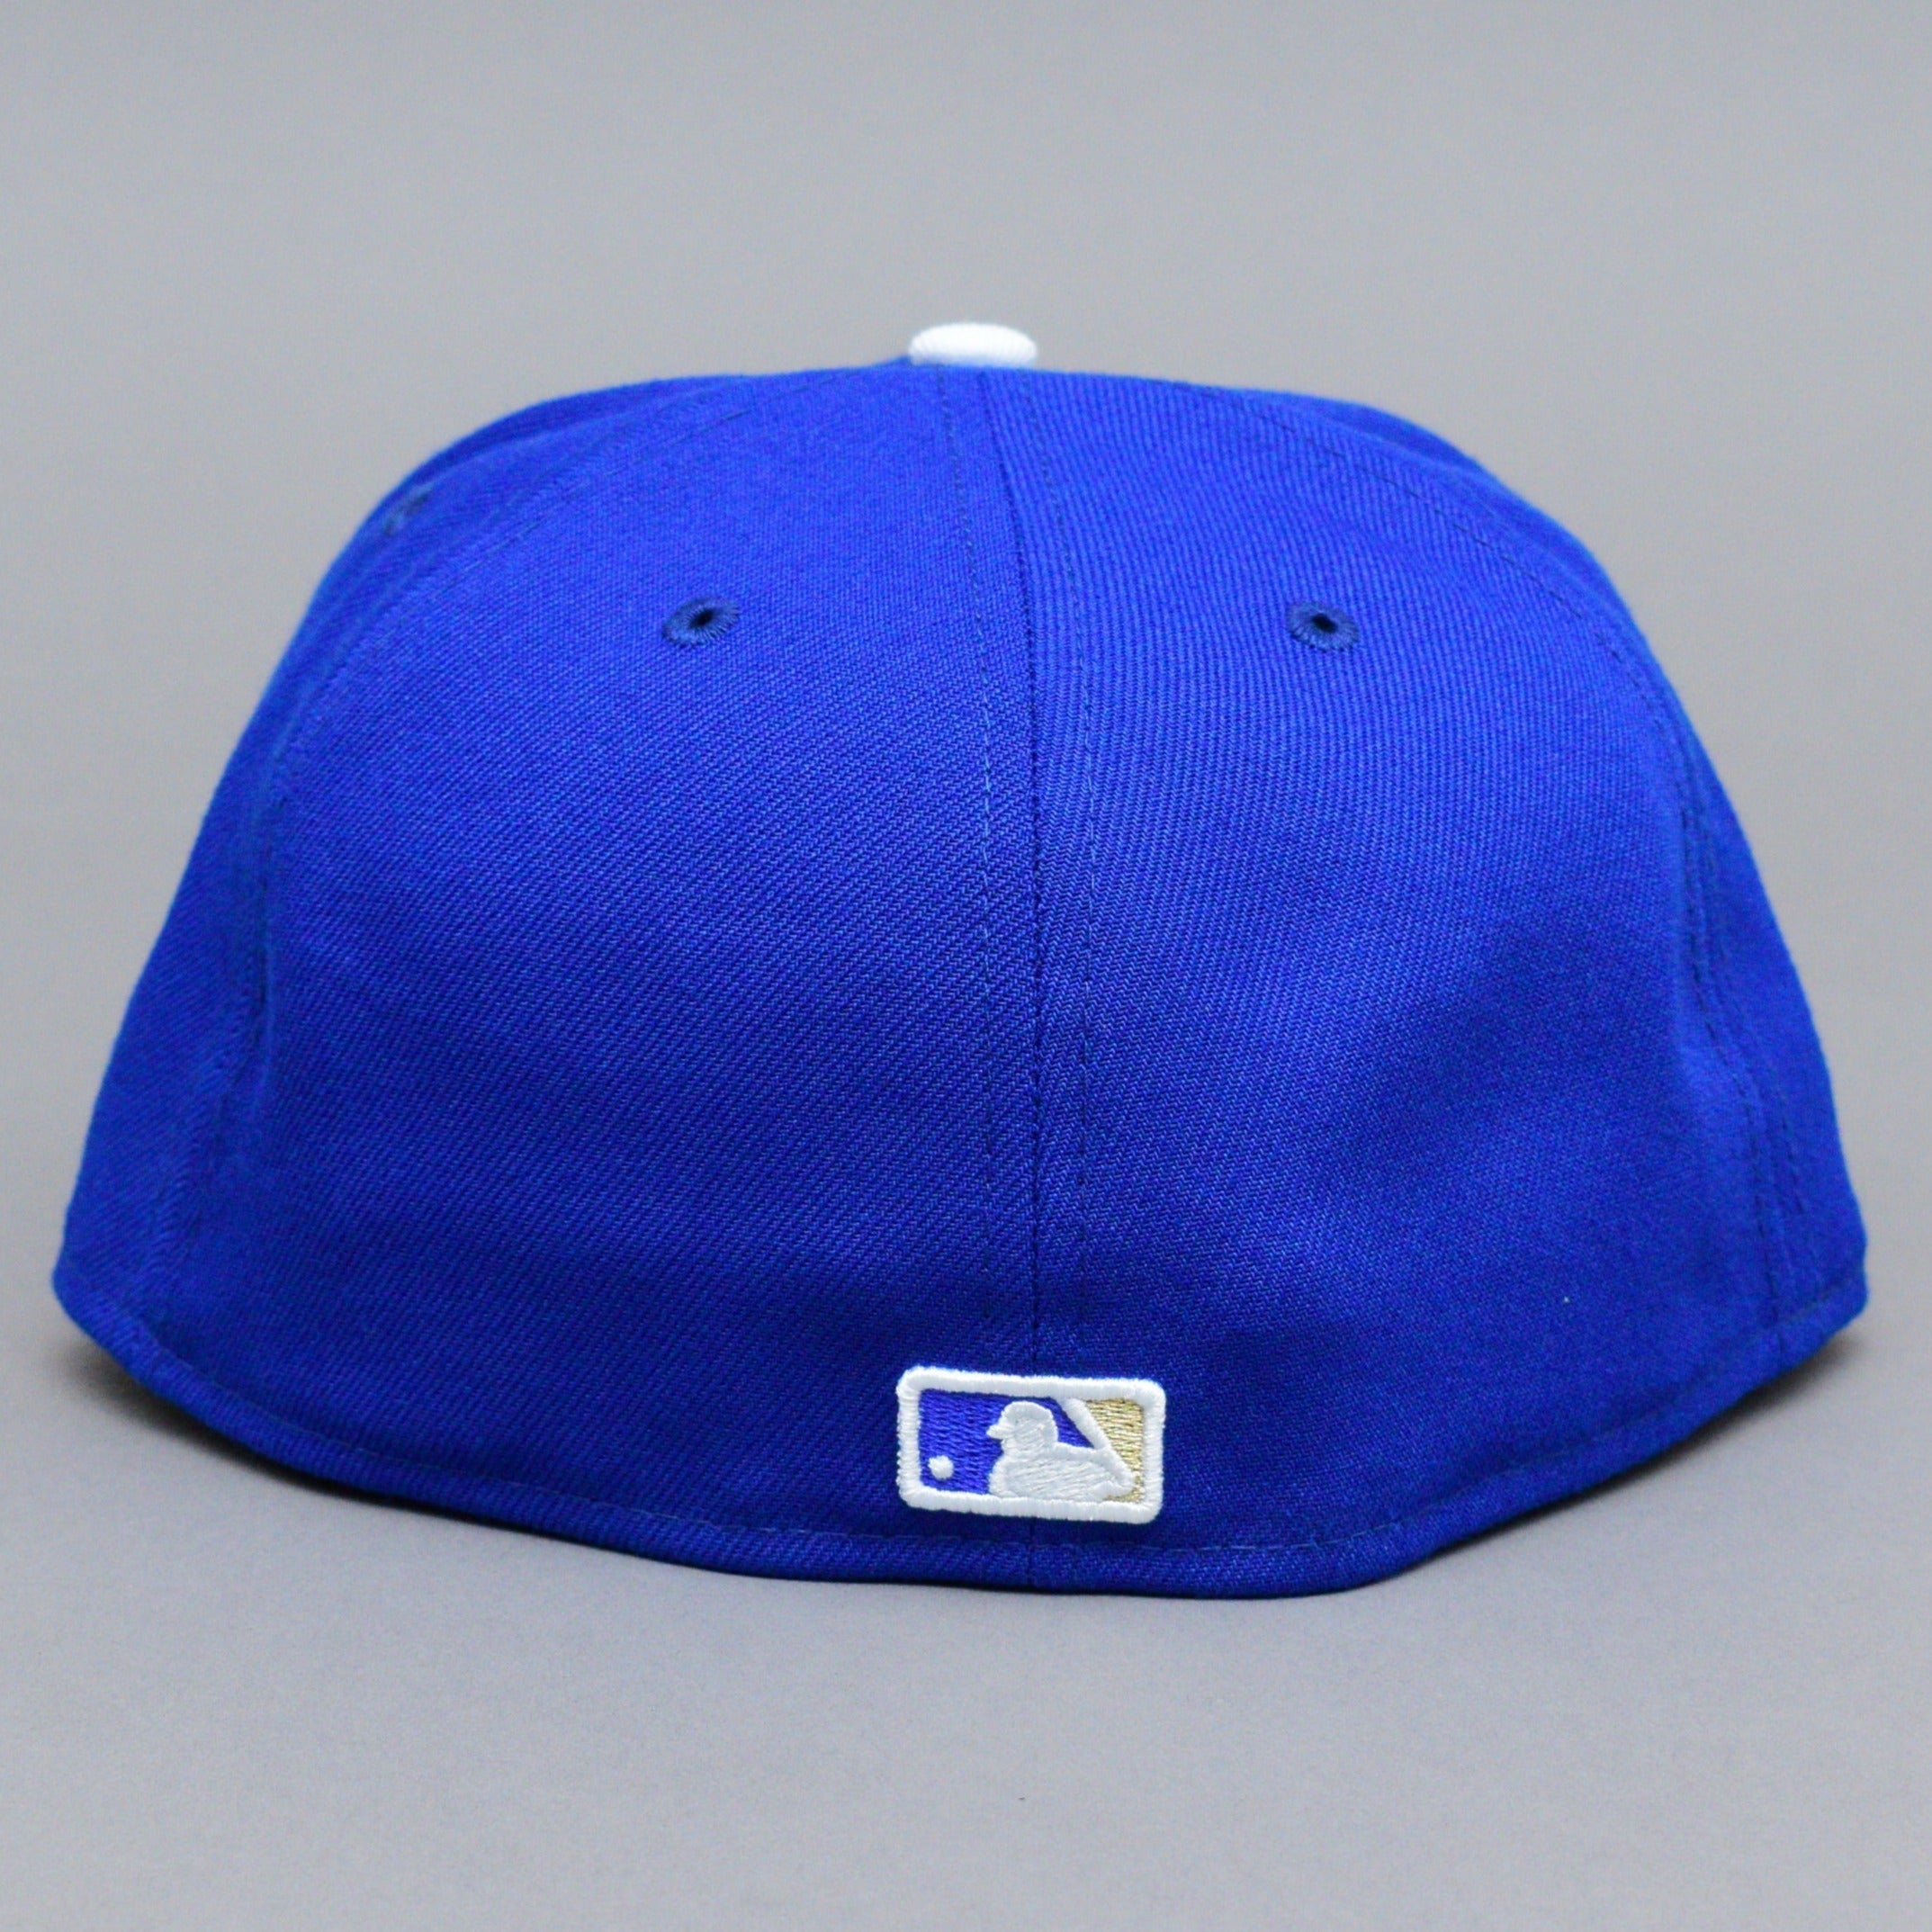 New Era - Kansas City Royals 59Fifty AC Perf - Fitted - Blue/White